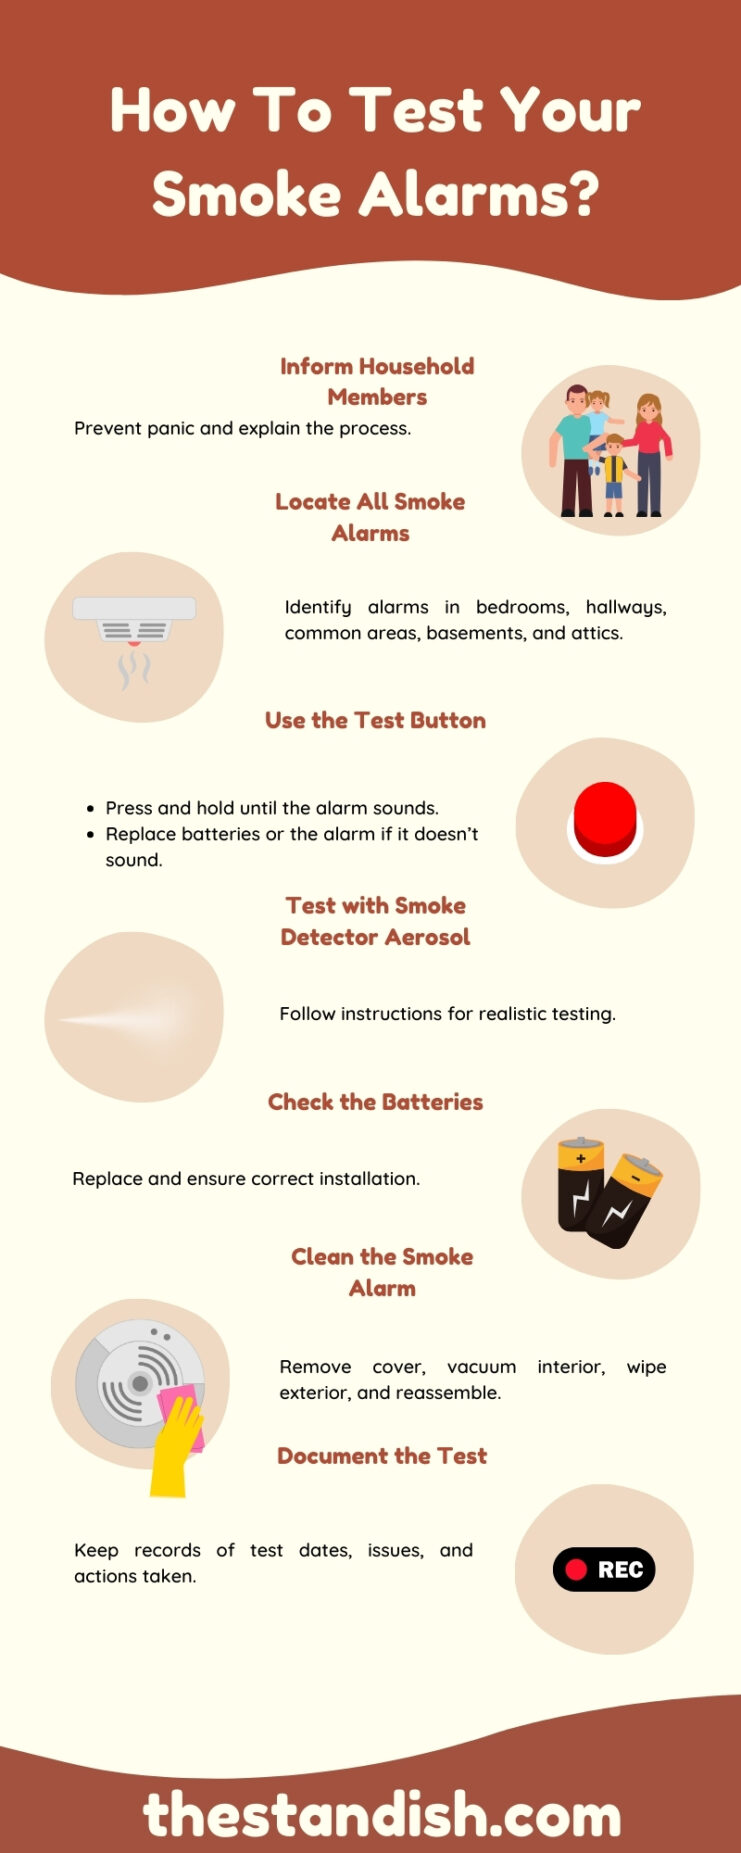 How To Test Your Smoke Alarms Infographic